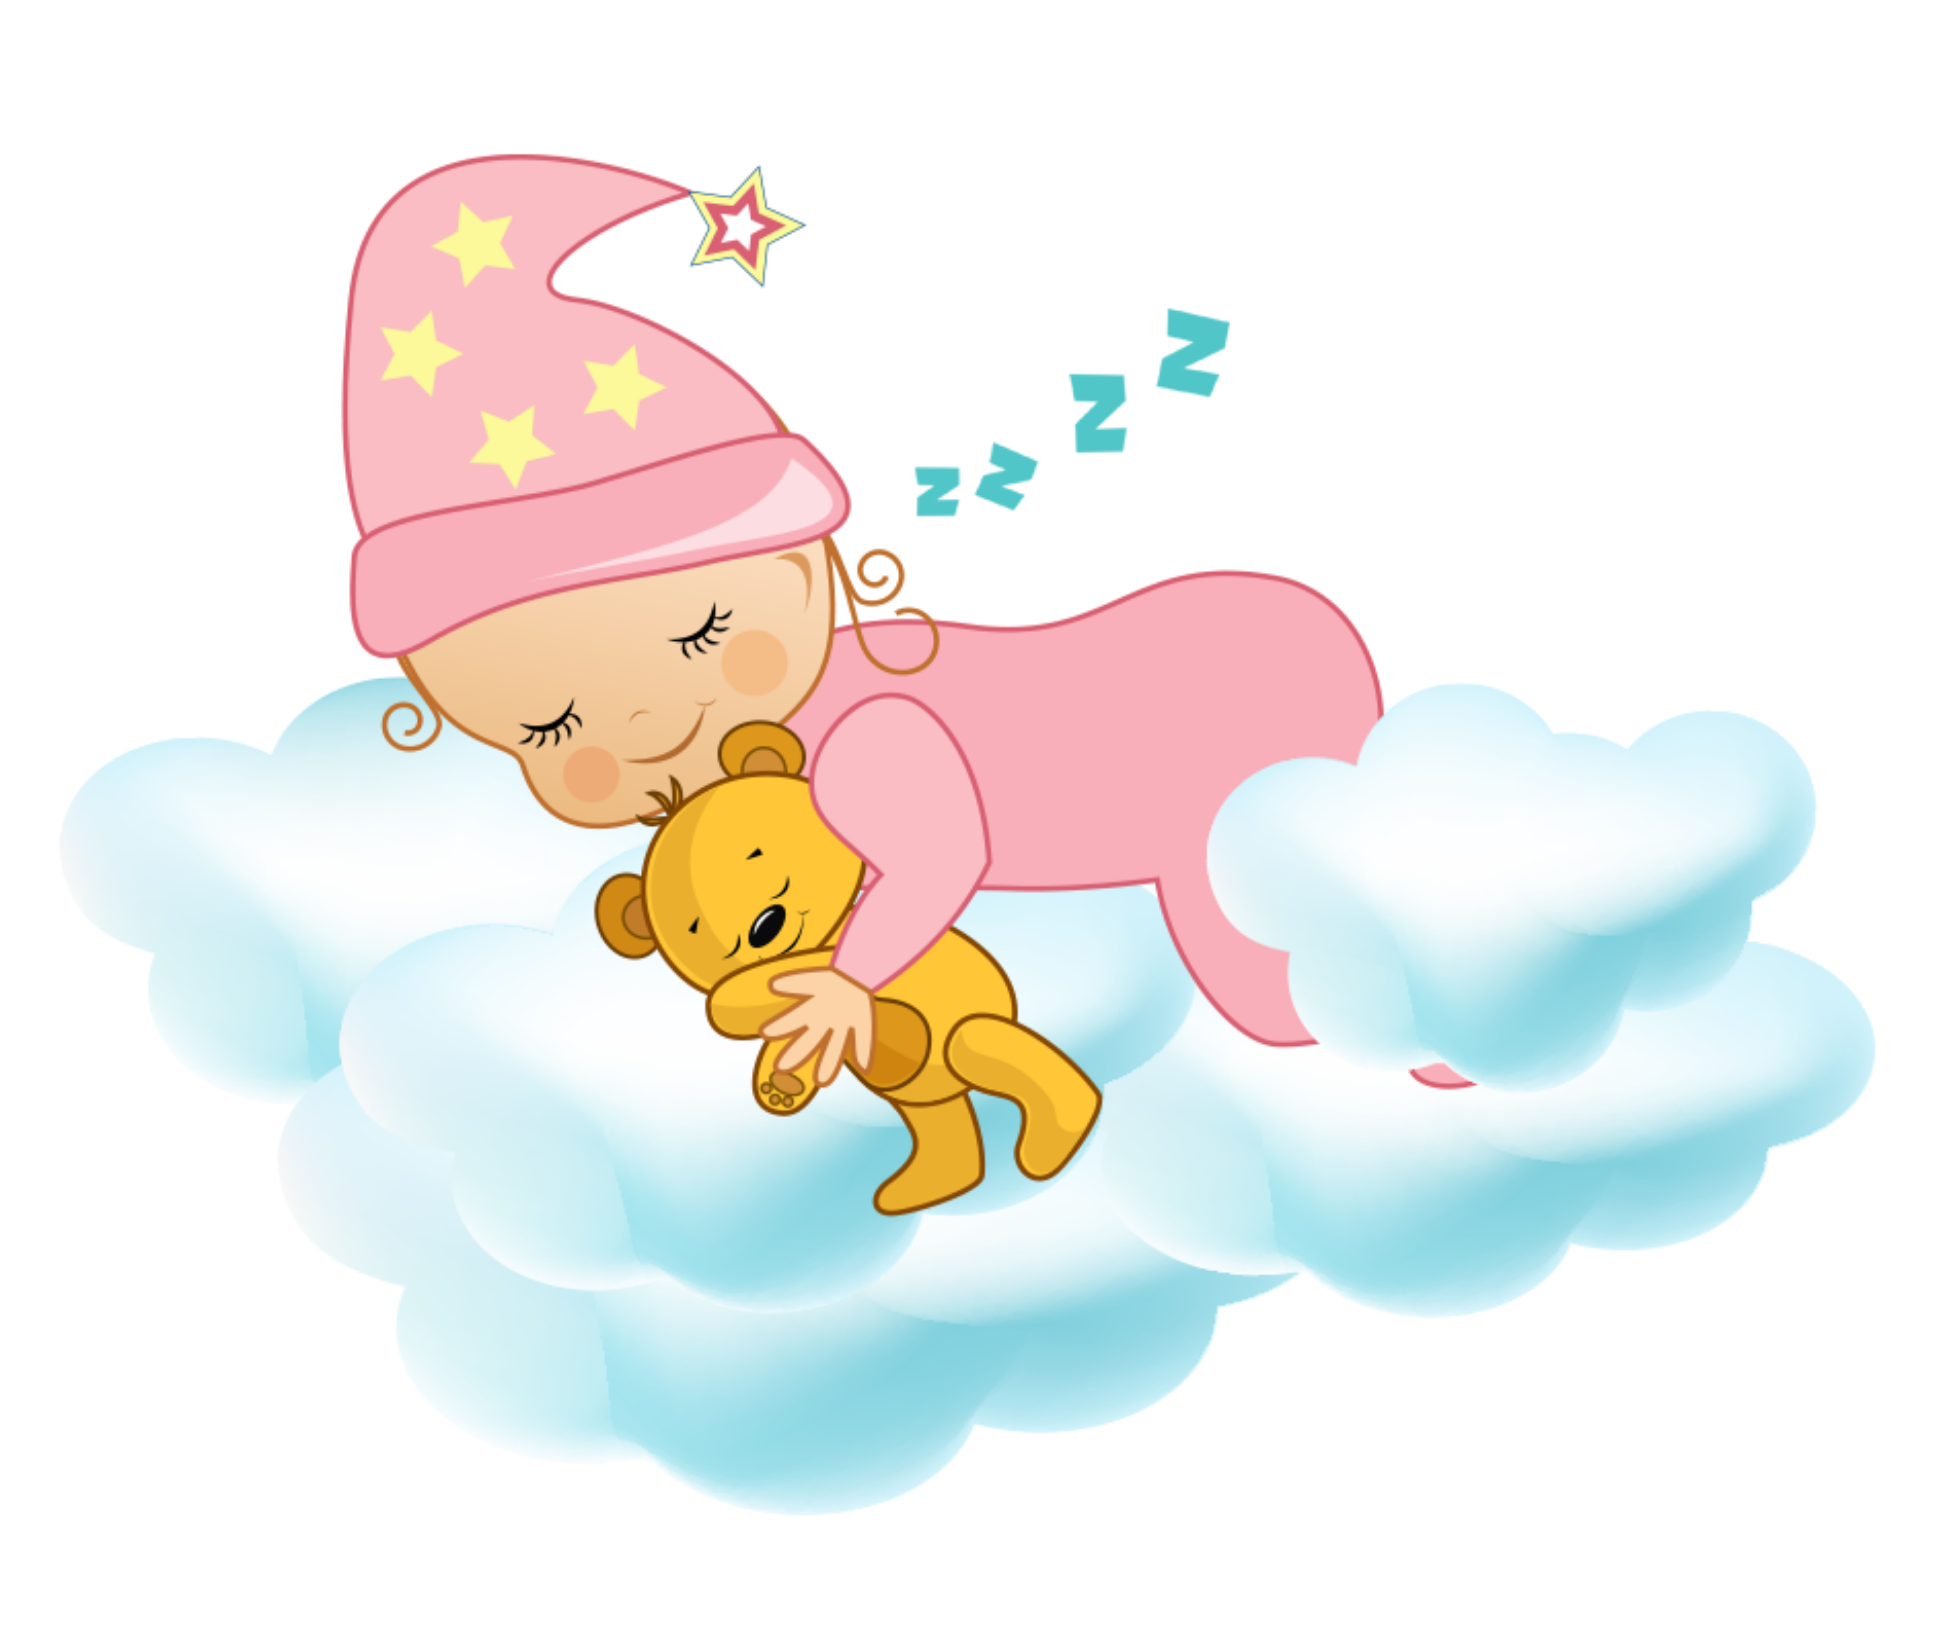 Freetoedit ftestickers baby cloud. Sleeping clipart nighttime activity